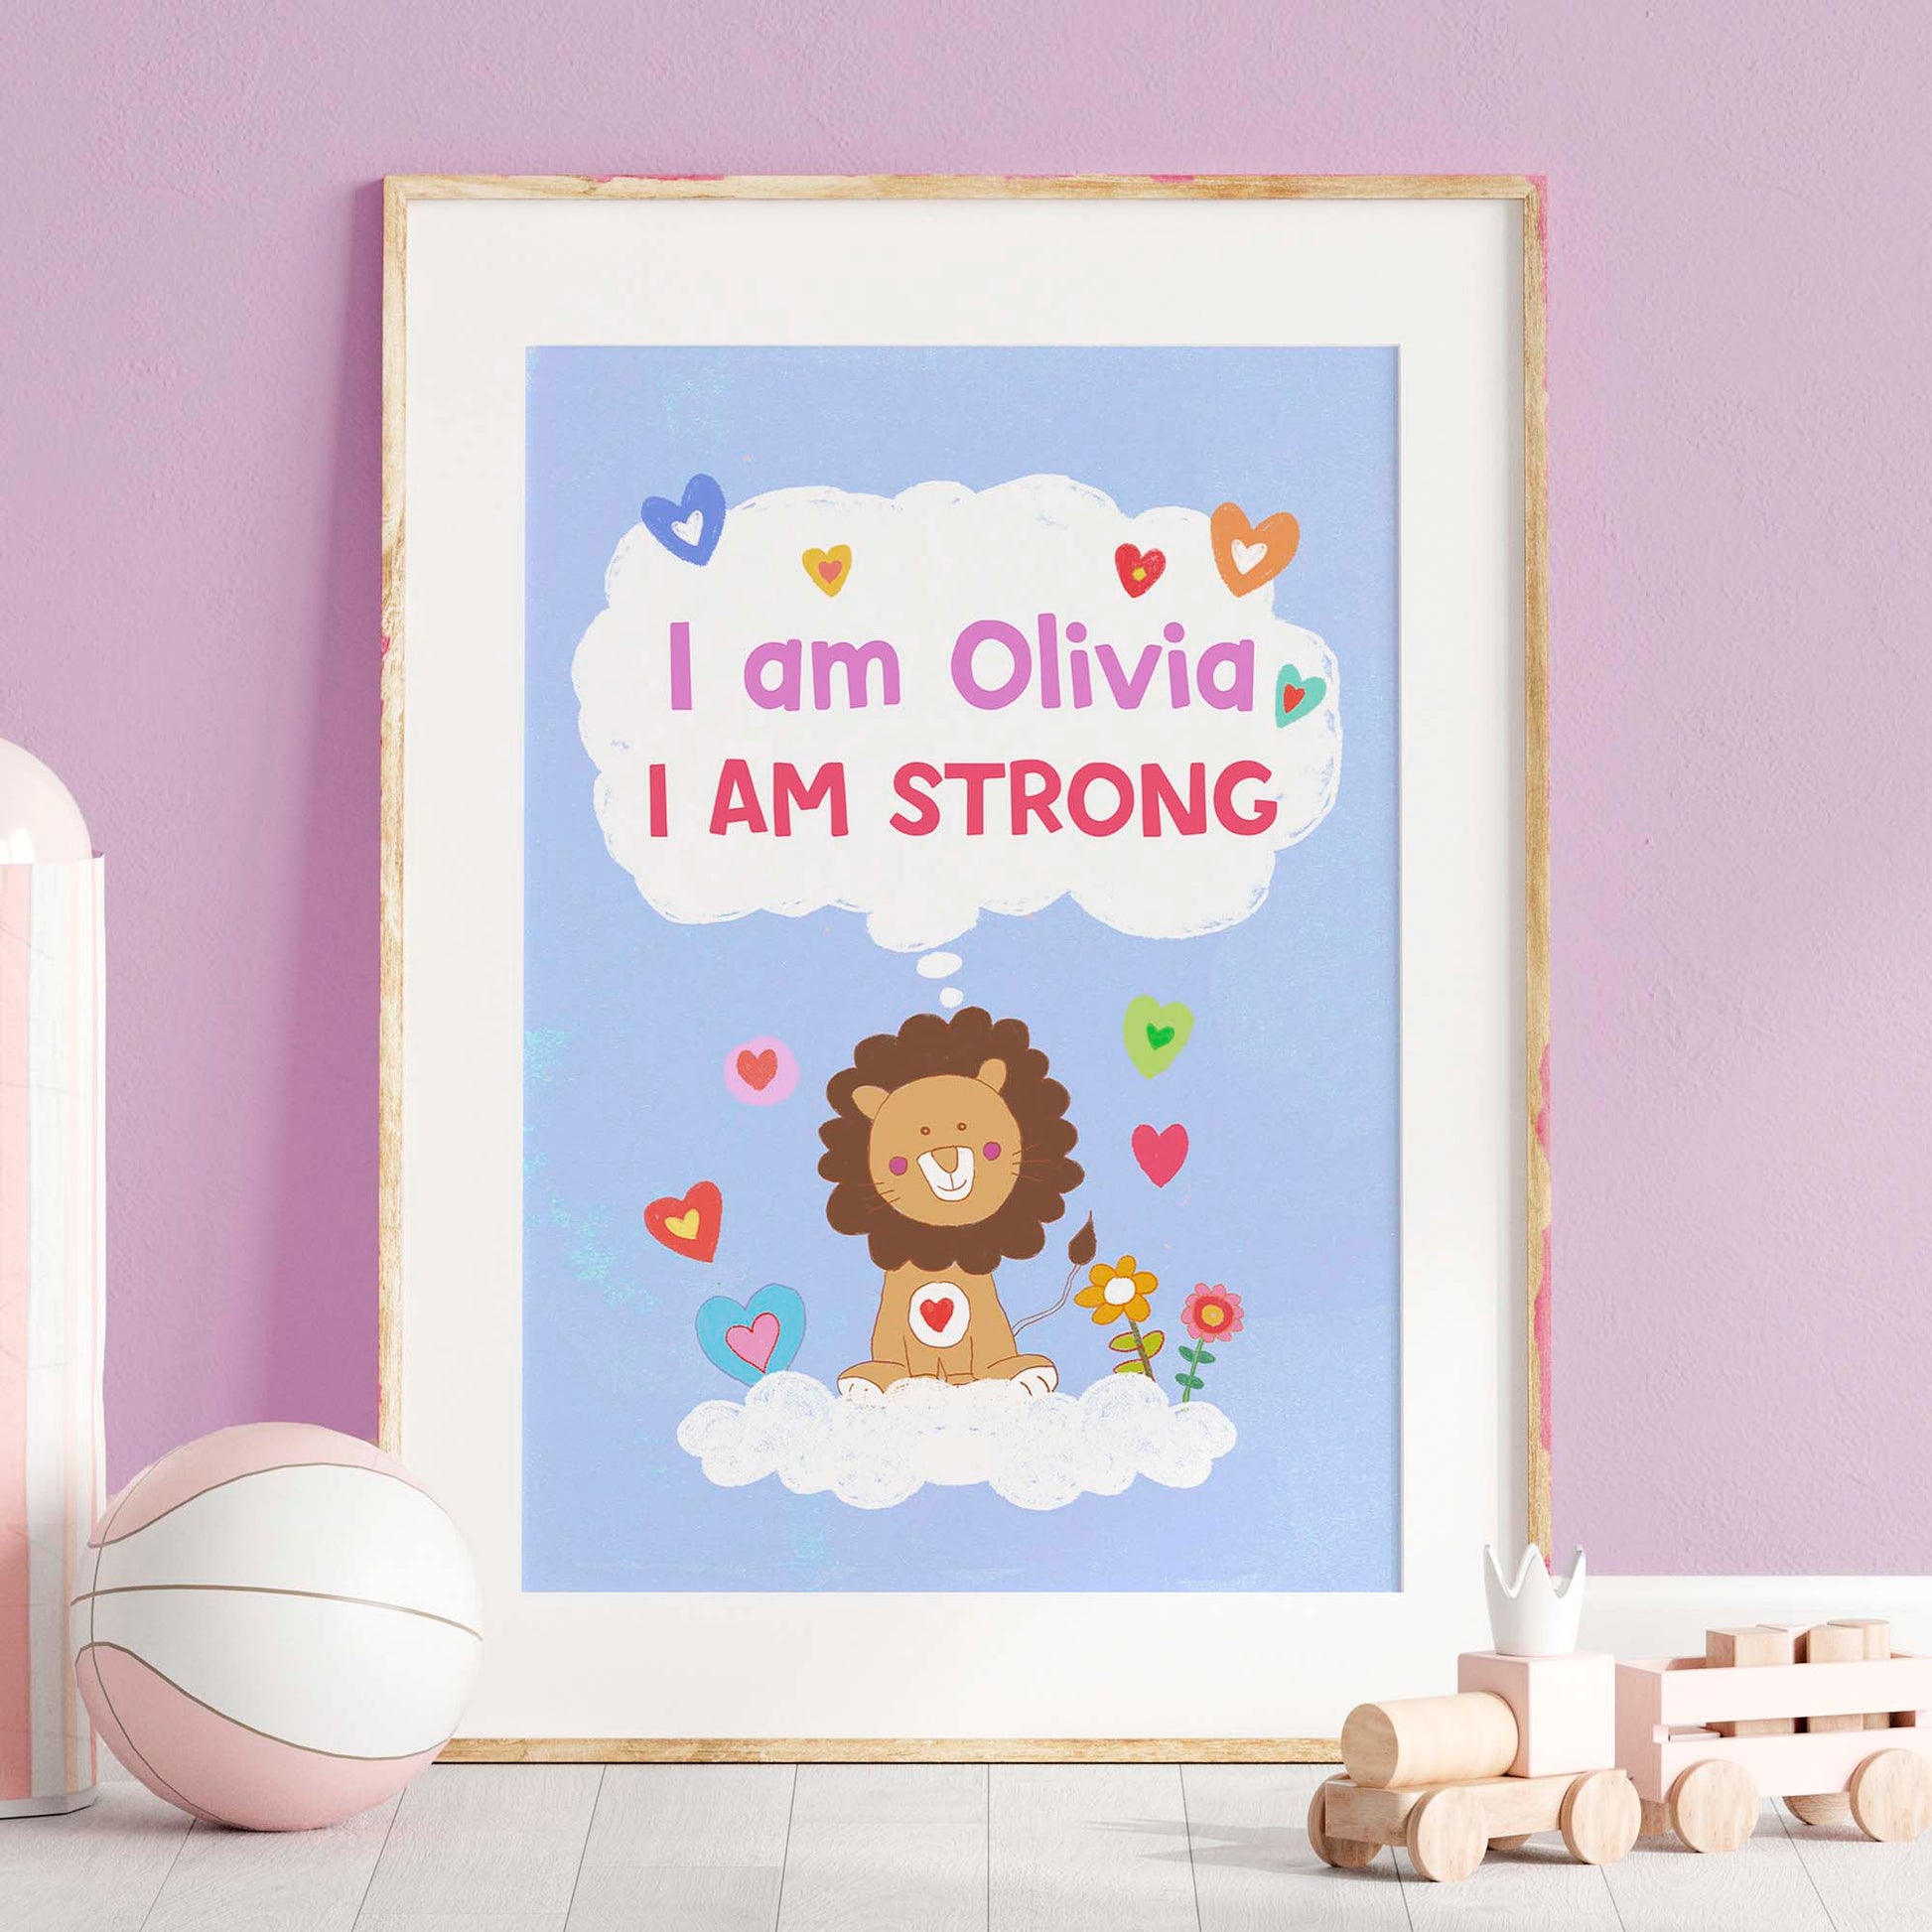 Framed lion poster with empowering affirmations, perfect for inspiring kids in nursery decor.